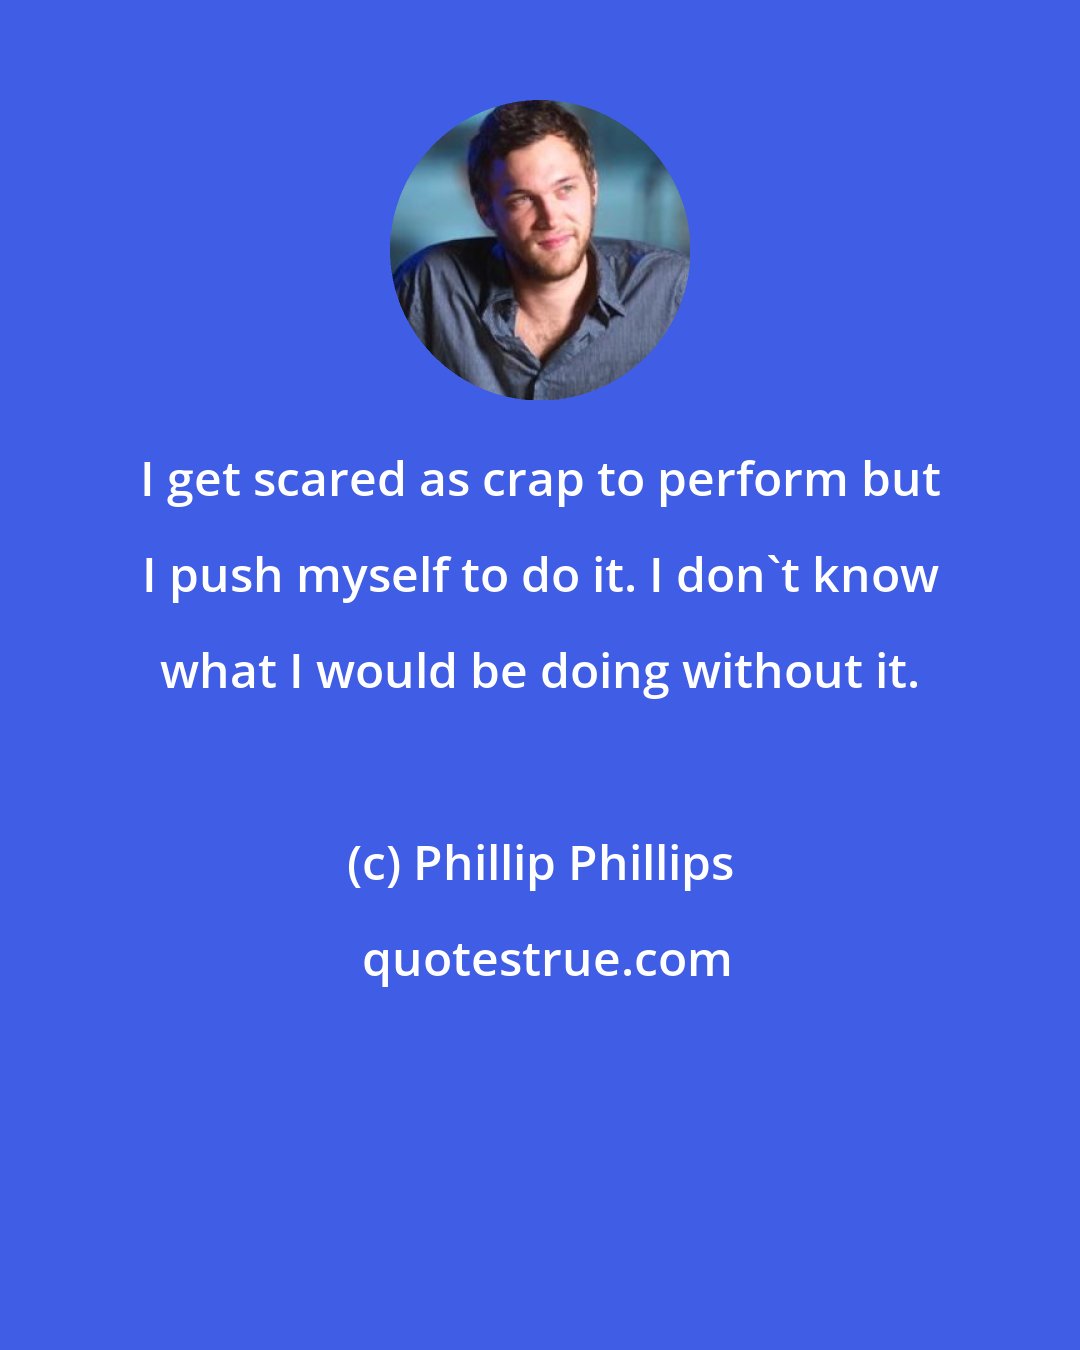 Phillip Phillips: I get scared as crap to perform but I push myself to do it. I don't know what I would be doing without it.